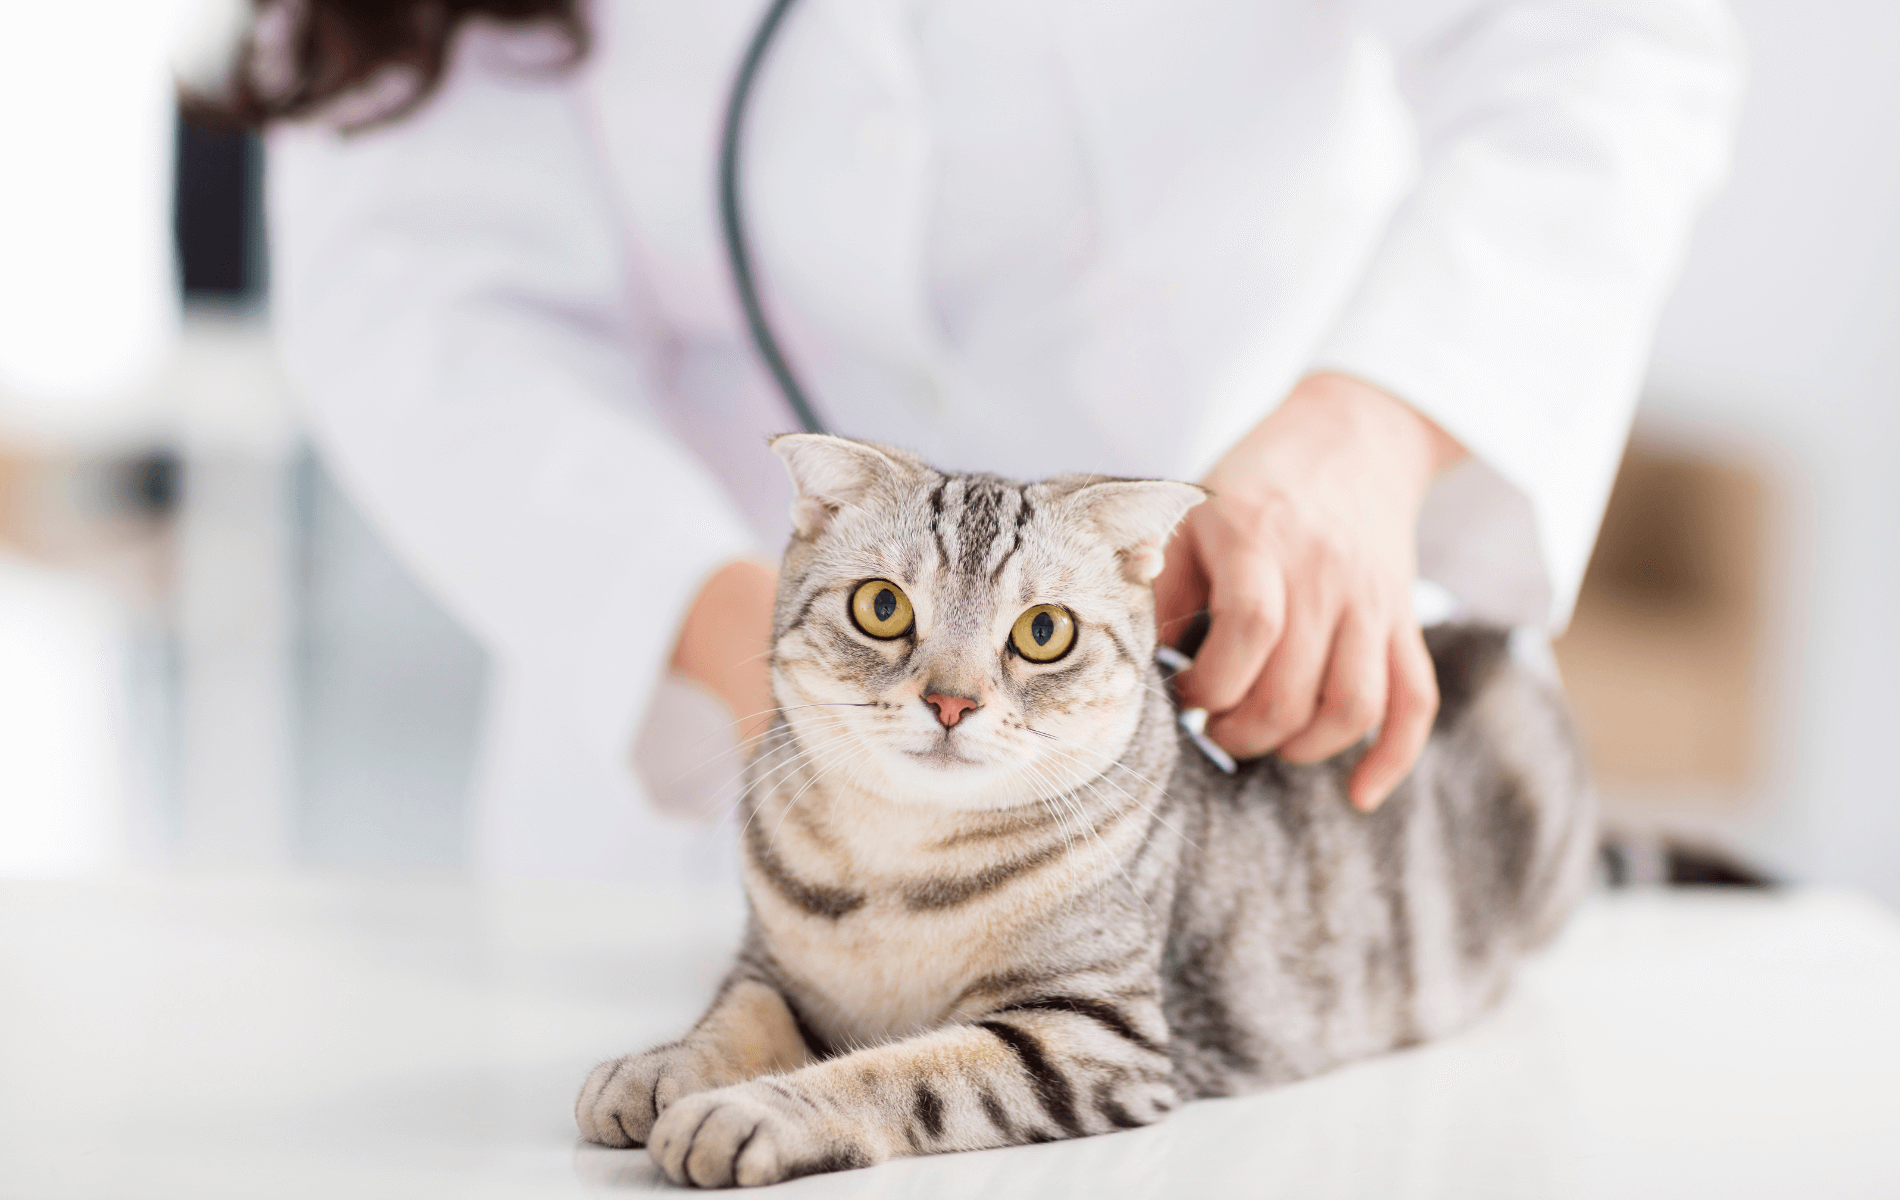 A person using a stethoscope to check the cat's heartbeat